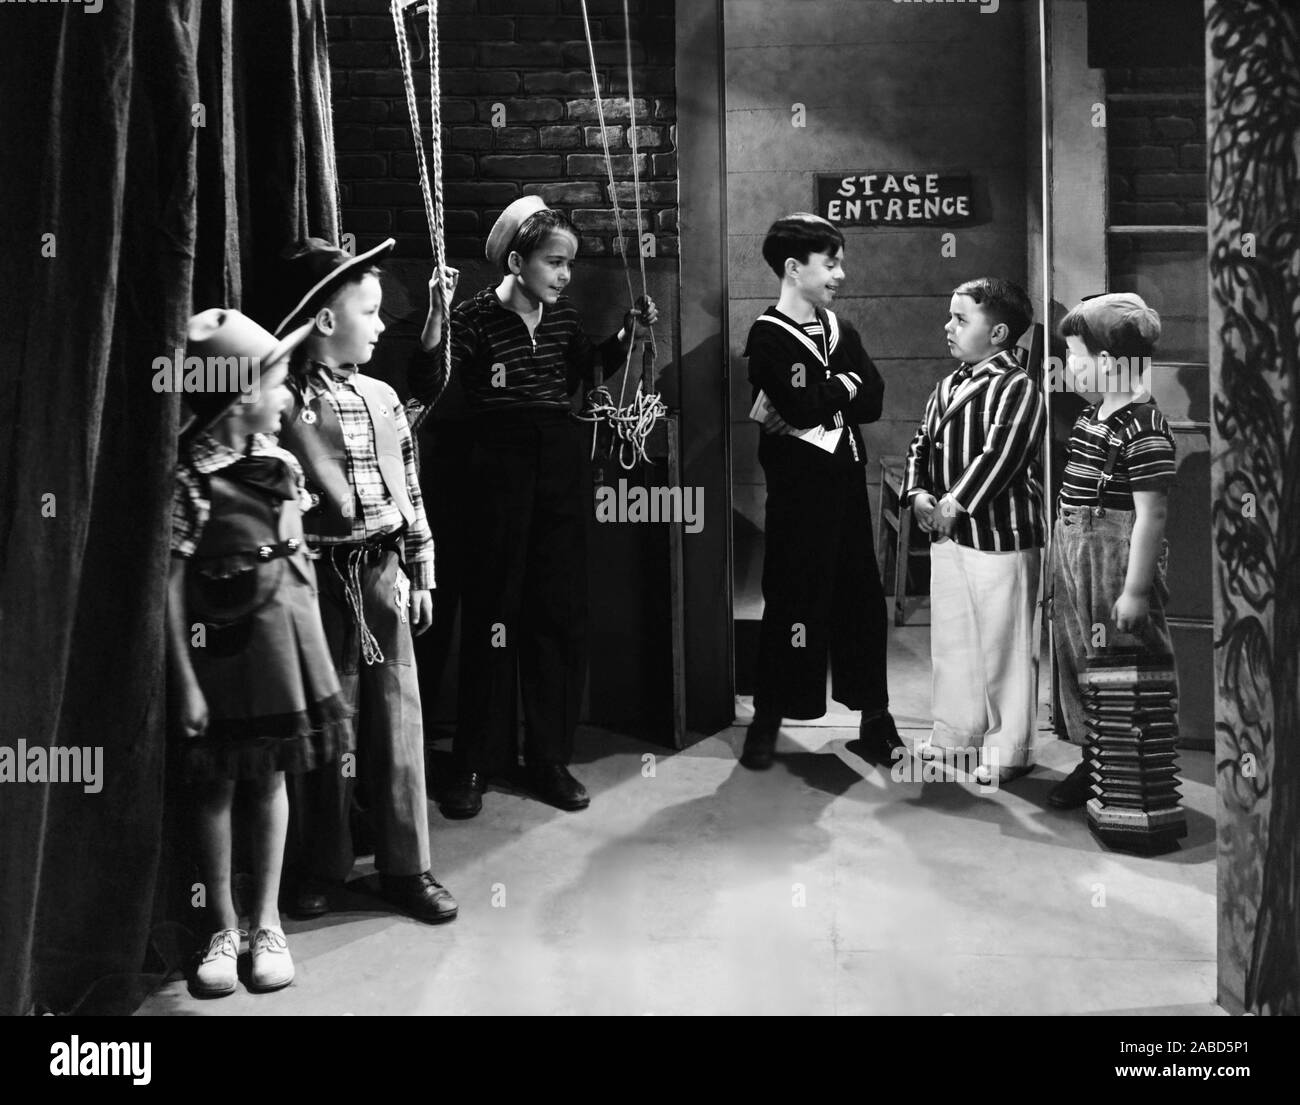 OUR GANG FOLLIES OF 1938, center to right: Carl 'Alfalfa' Switzer, Spanky McFarland, Eugene 'Porky' Lee, 1937 Stock Photo